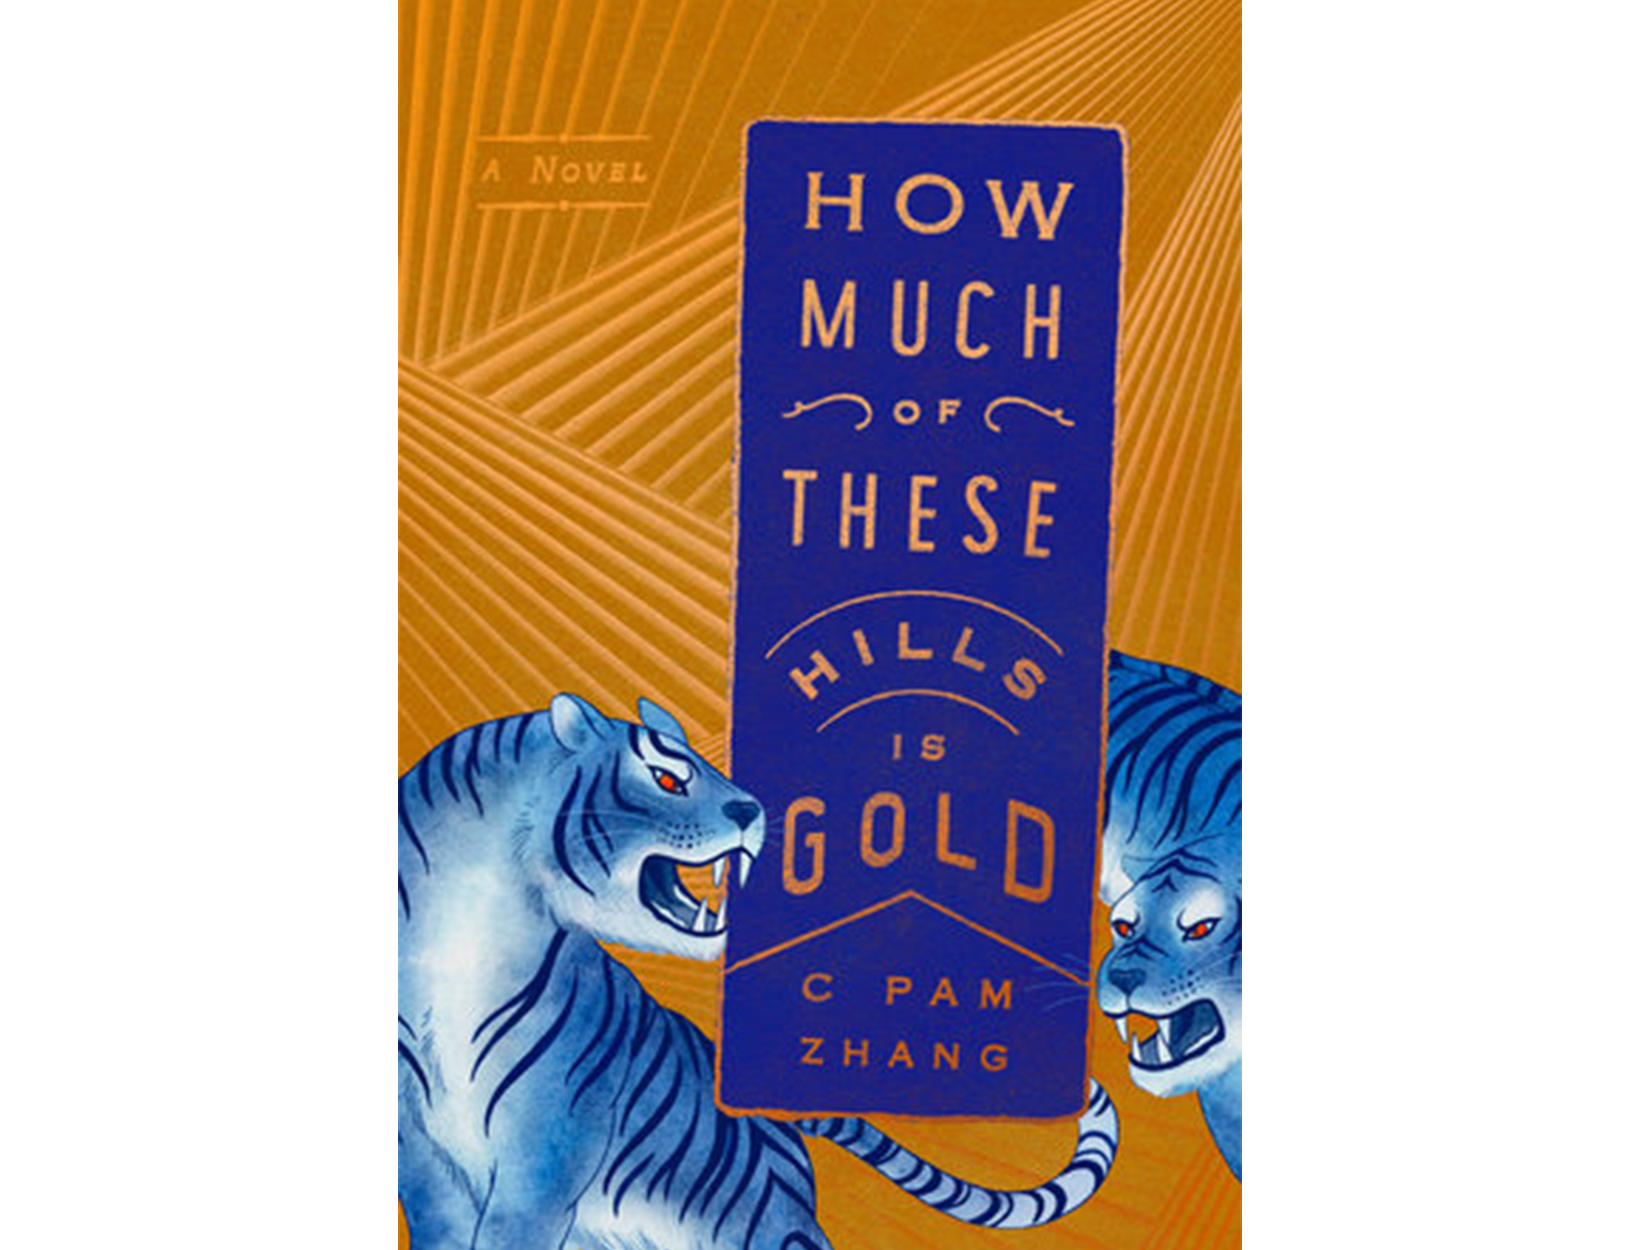 <em>How Much of These Hills Is Gold</em> by C Pam Zhang